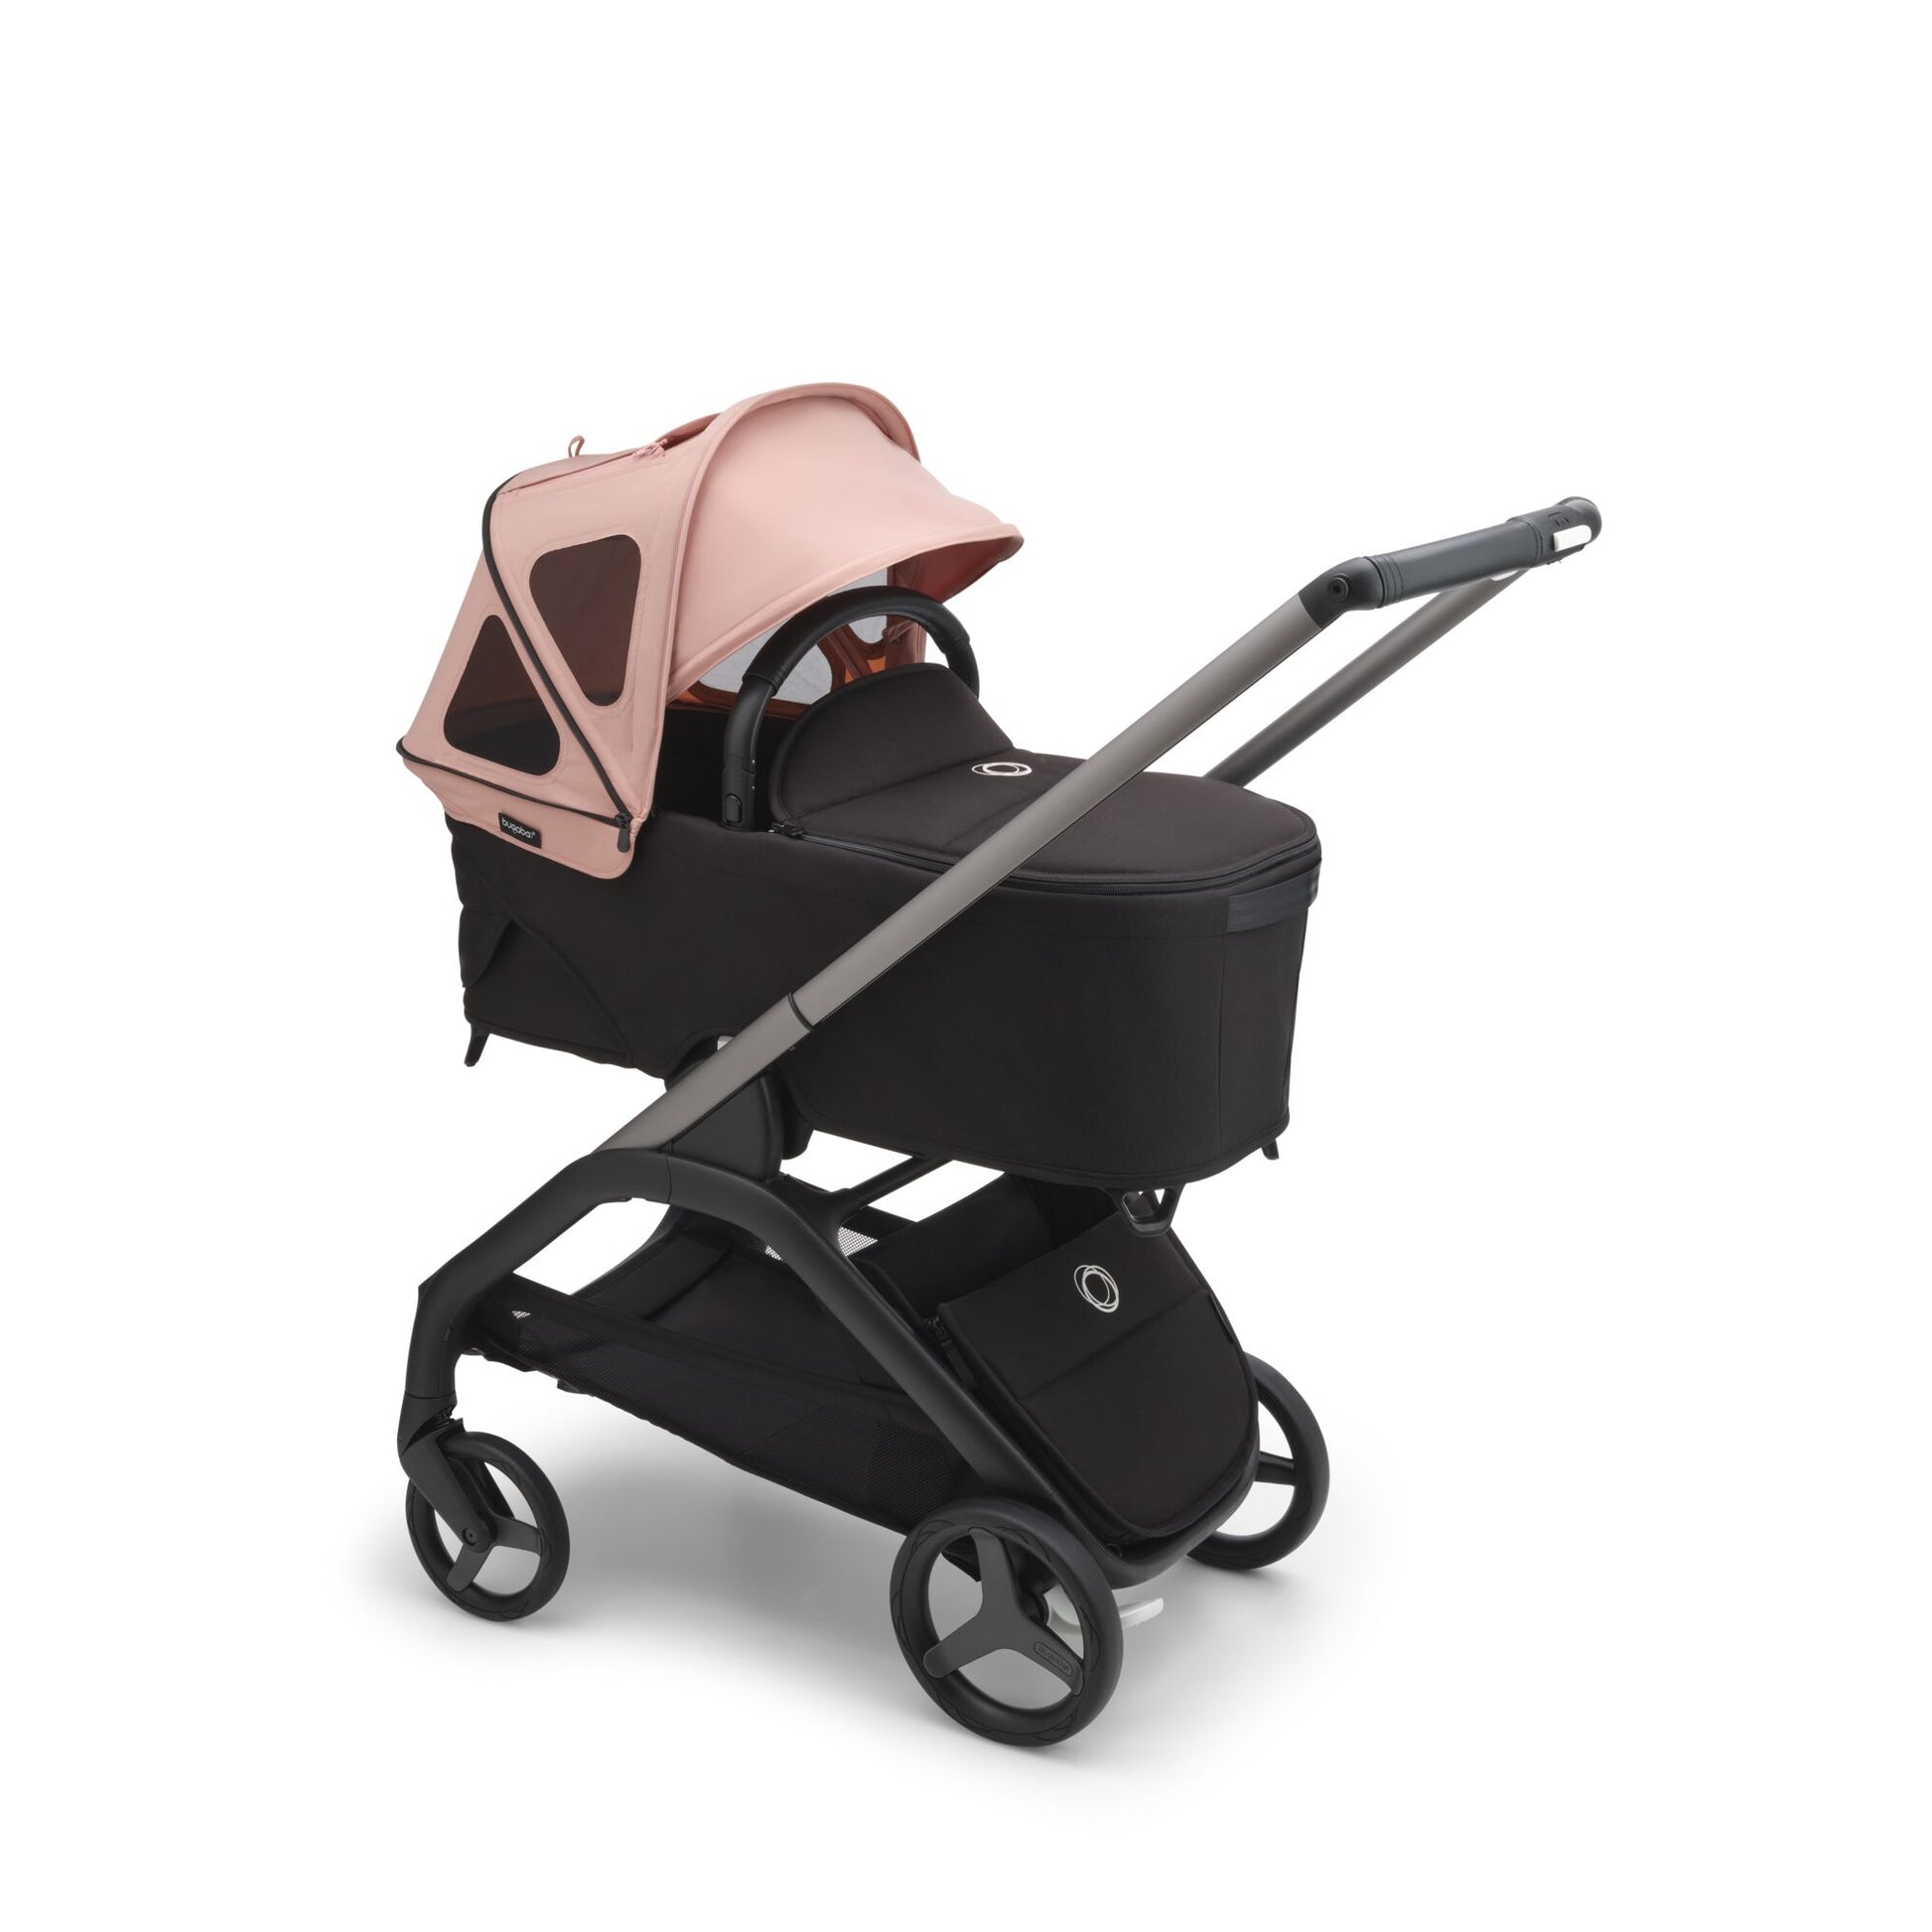 Bugaboo Dragonfly Breezy Sun Canopy - Morning Pink on Bugaboo Dragonfly stroller